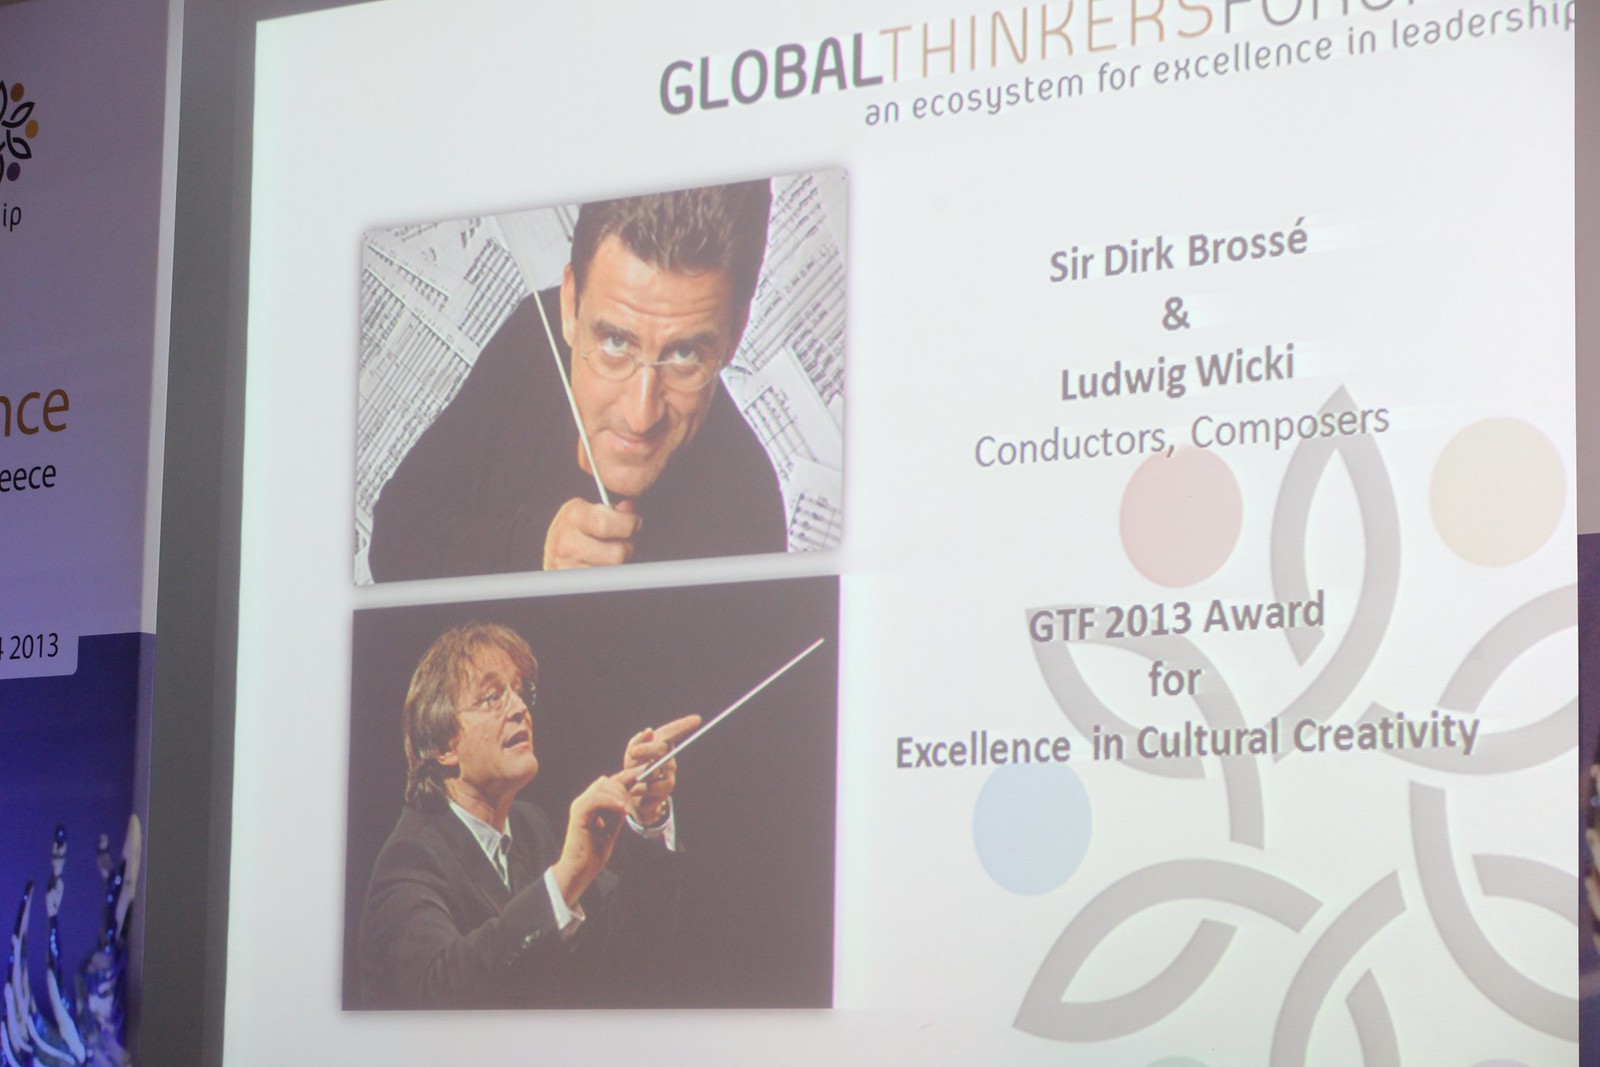 Sir Dirk Brosse & Ludwig Wicki share GTF 2013 Award for Excellence in Cultural Creativity